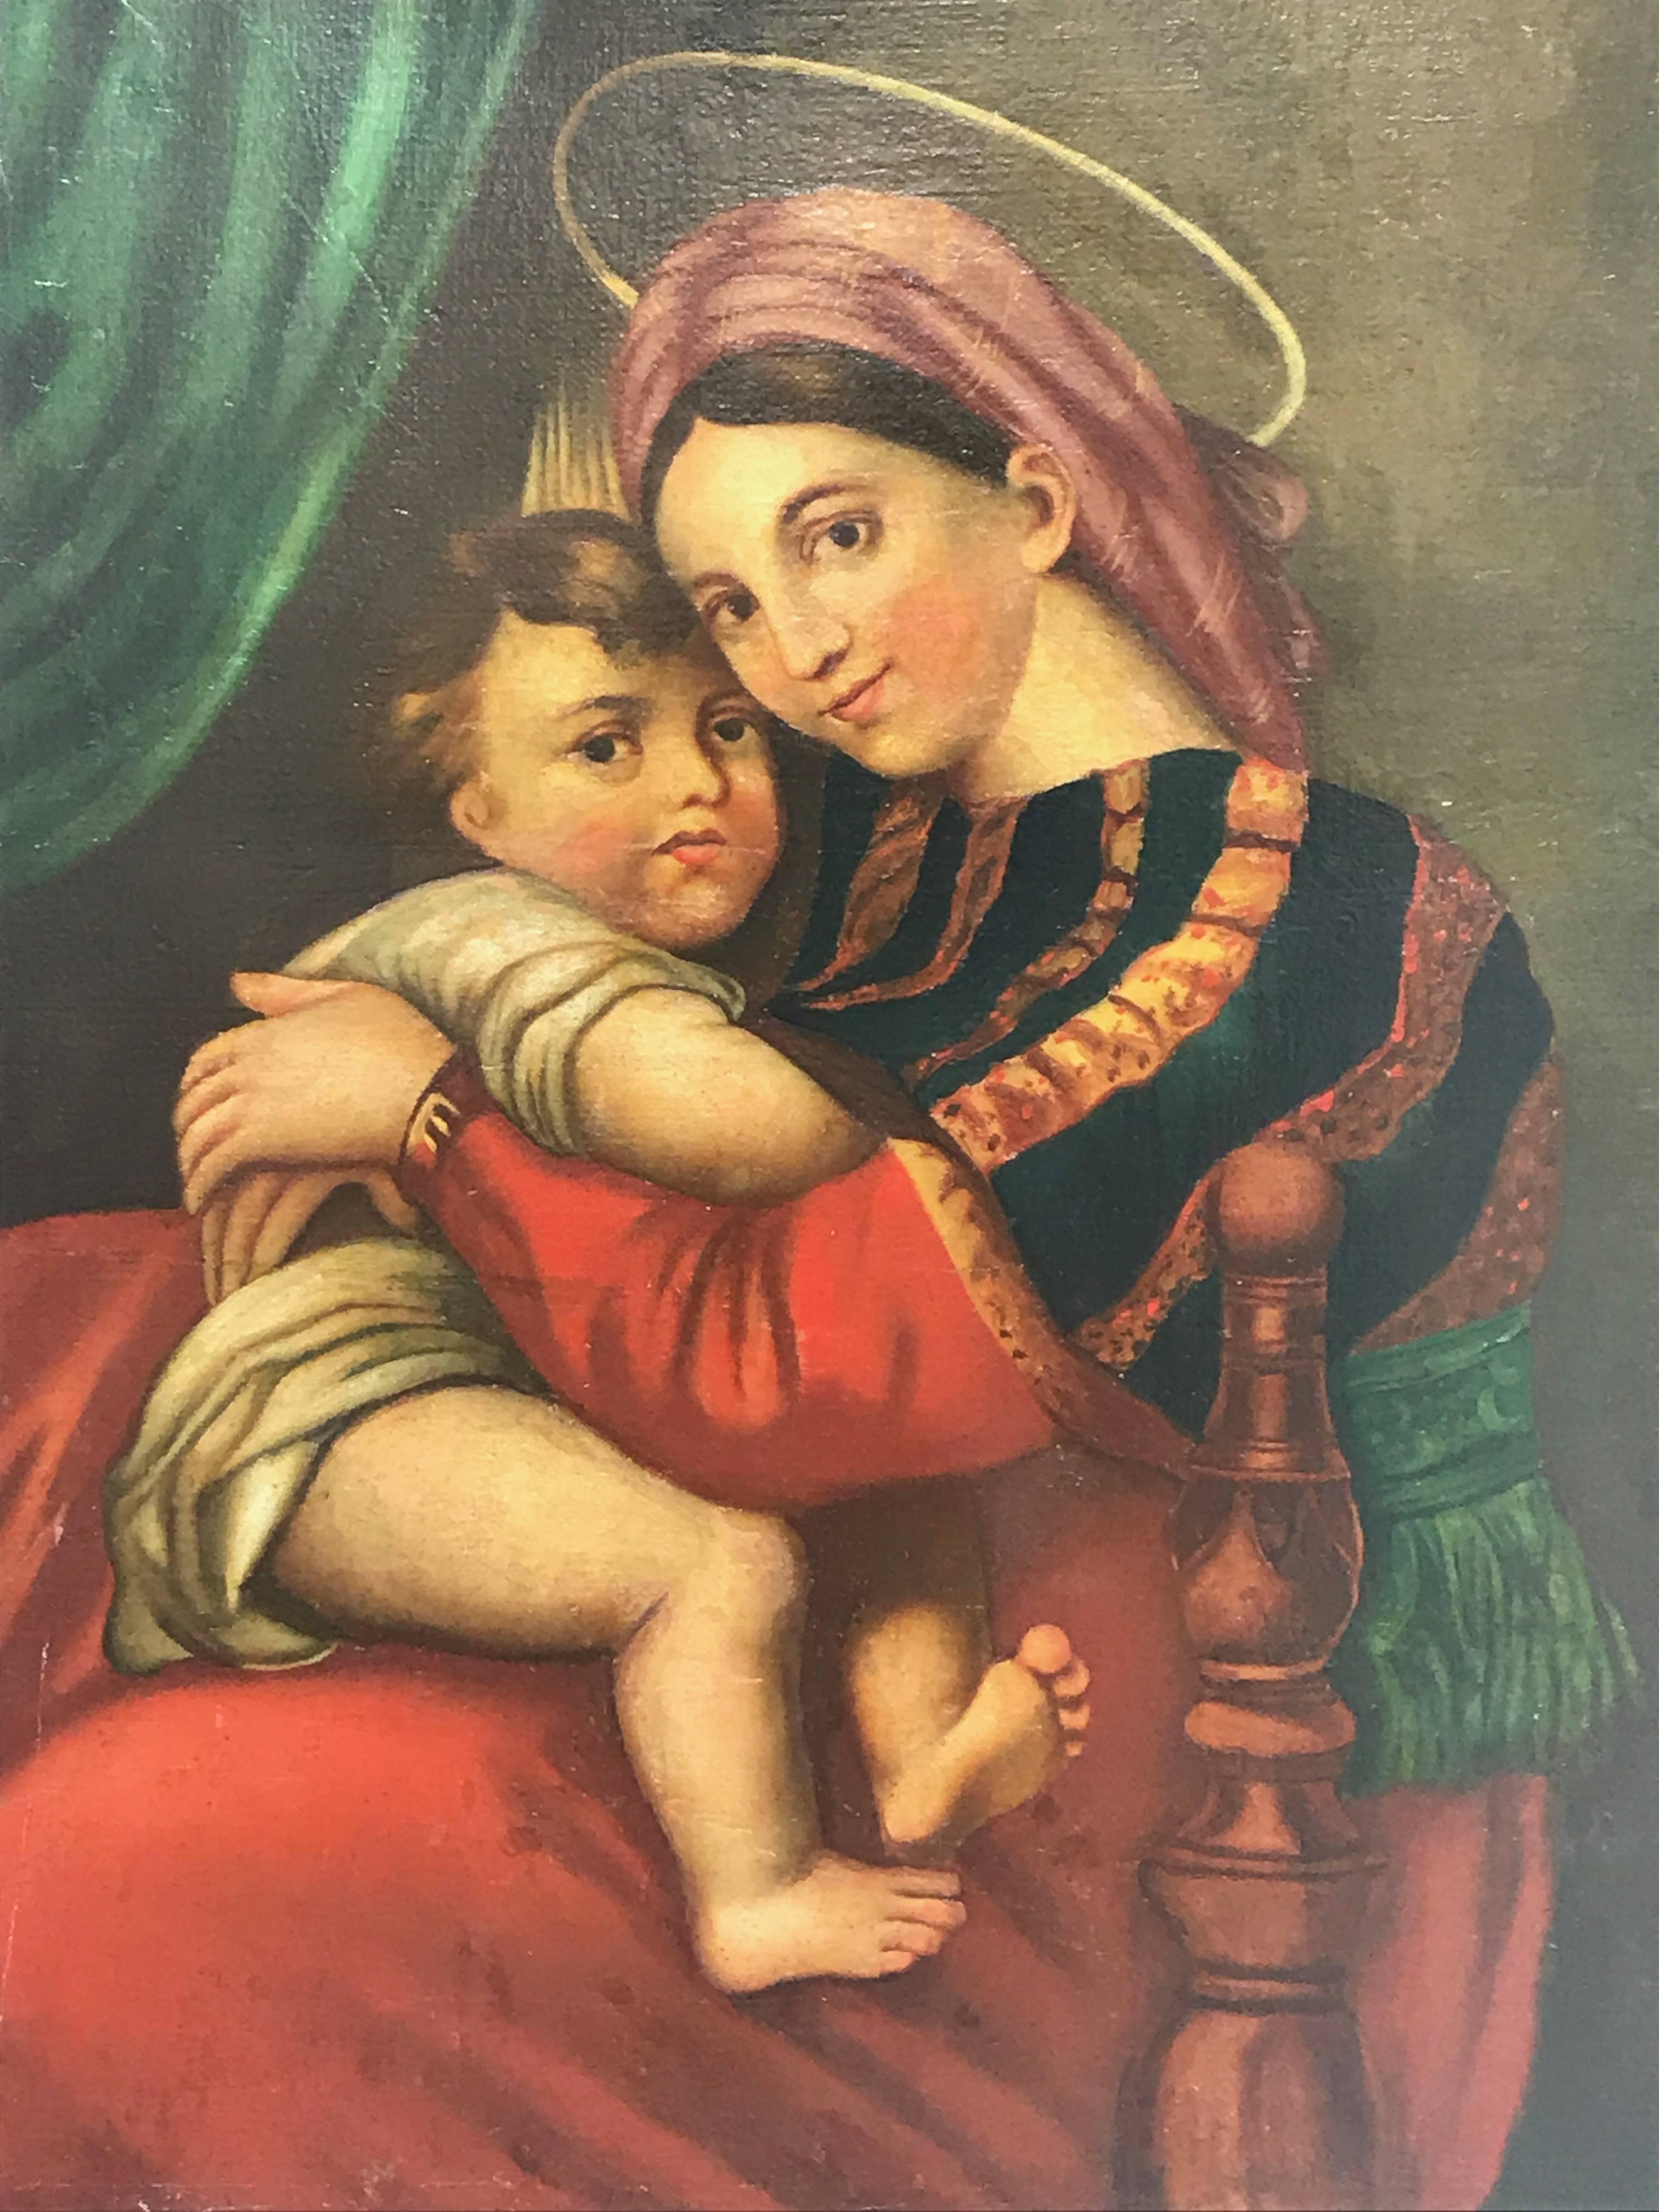 Oil on canvas religious painting depicting the Virgin with Child, dating back to second half of 19th century, it is a replica after Raphael's Madonna of the Chair, the famous Madonna della Seggiola, the Renaissance work painted around 1513, housed